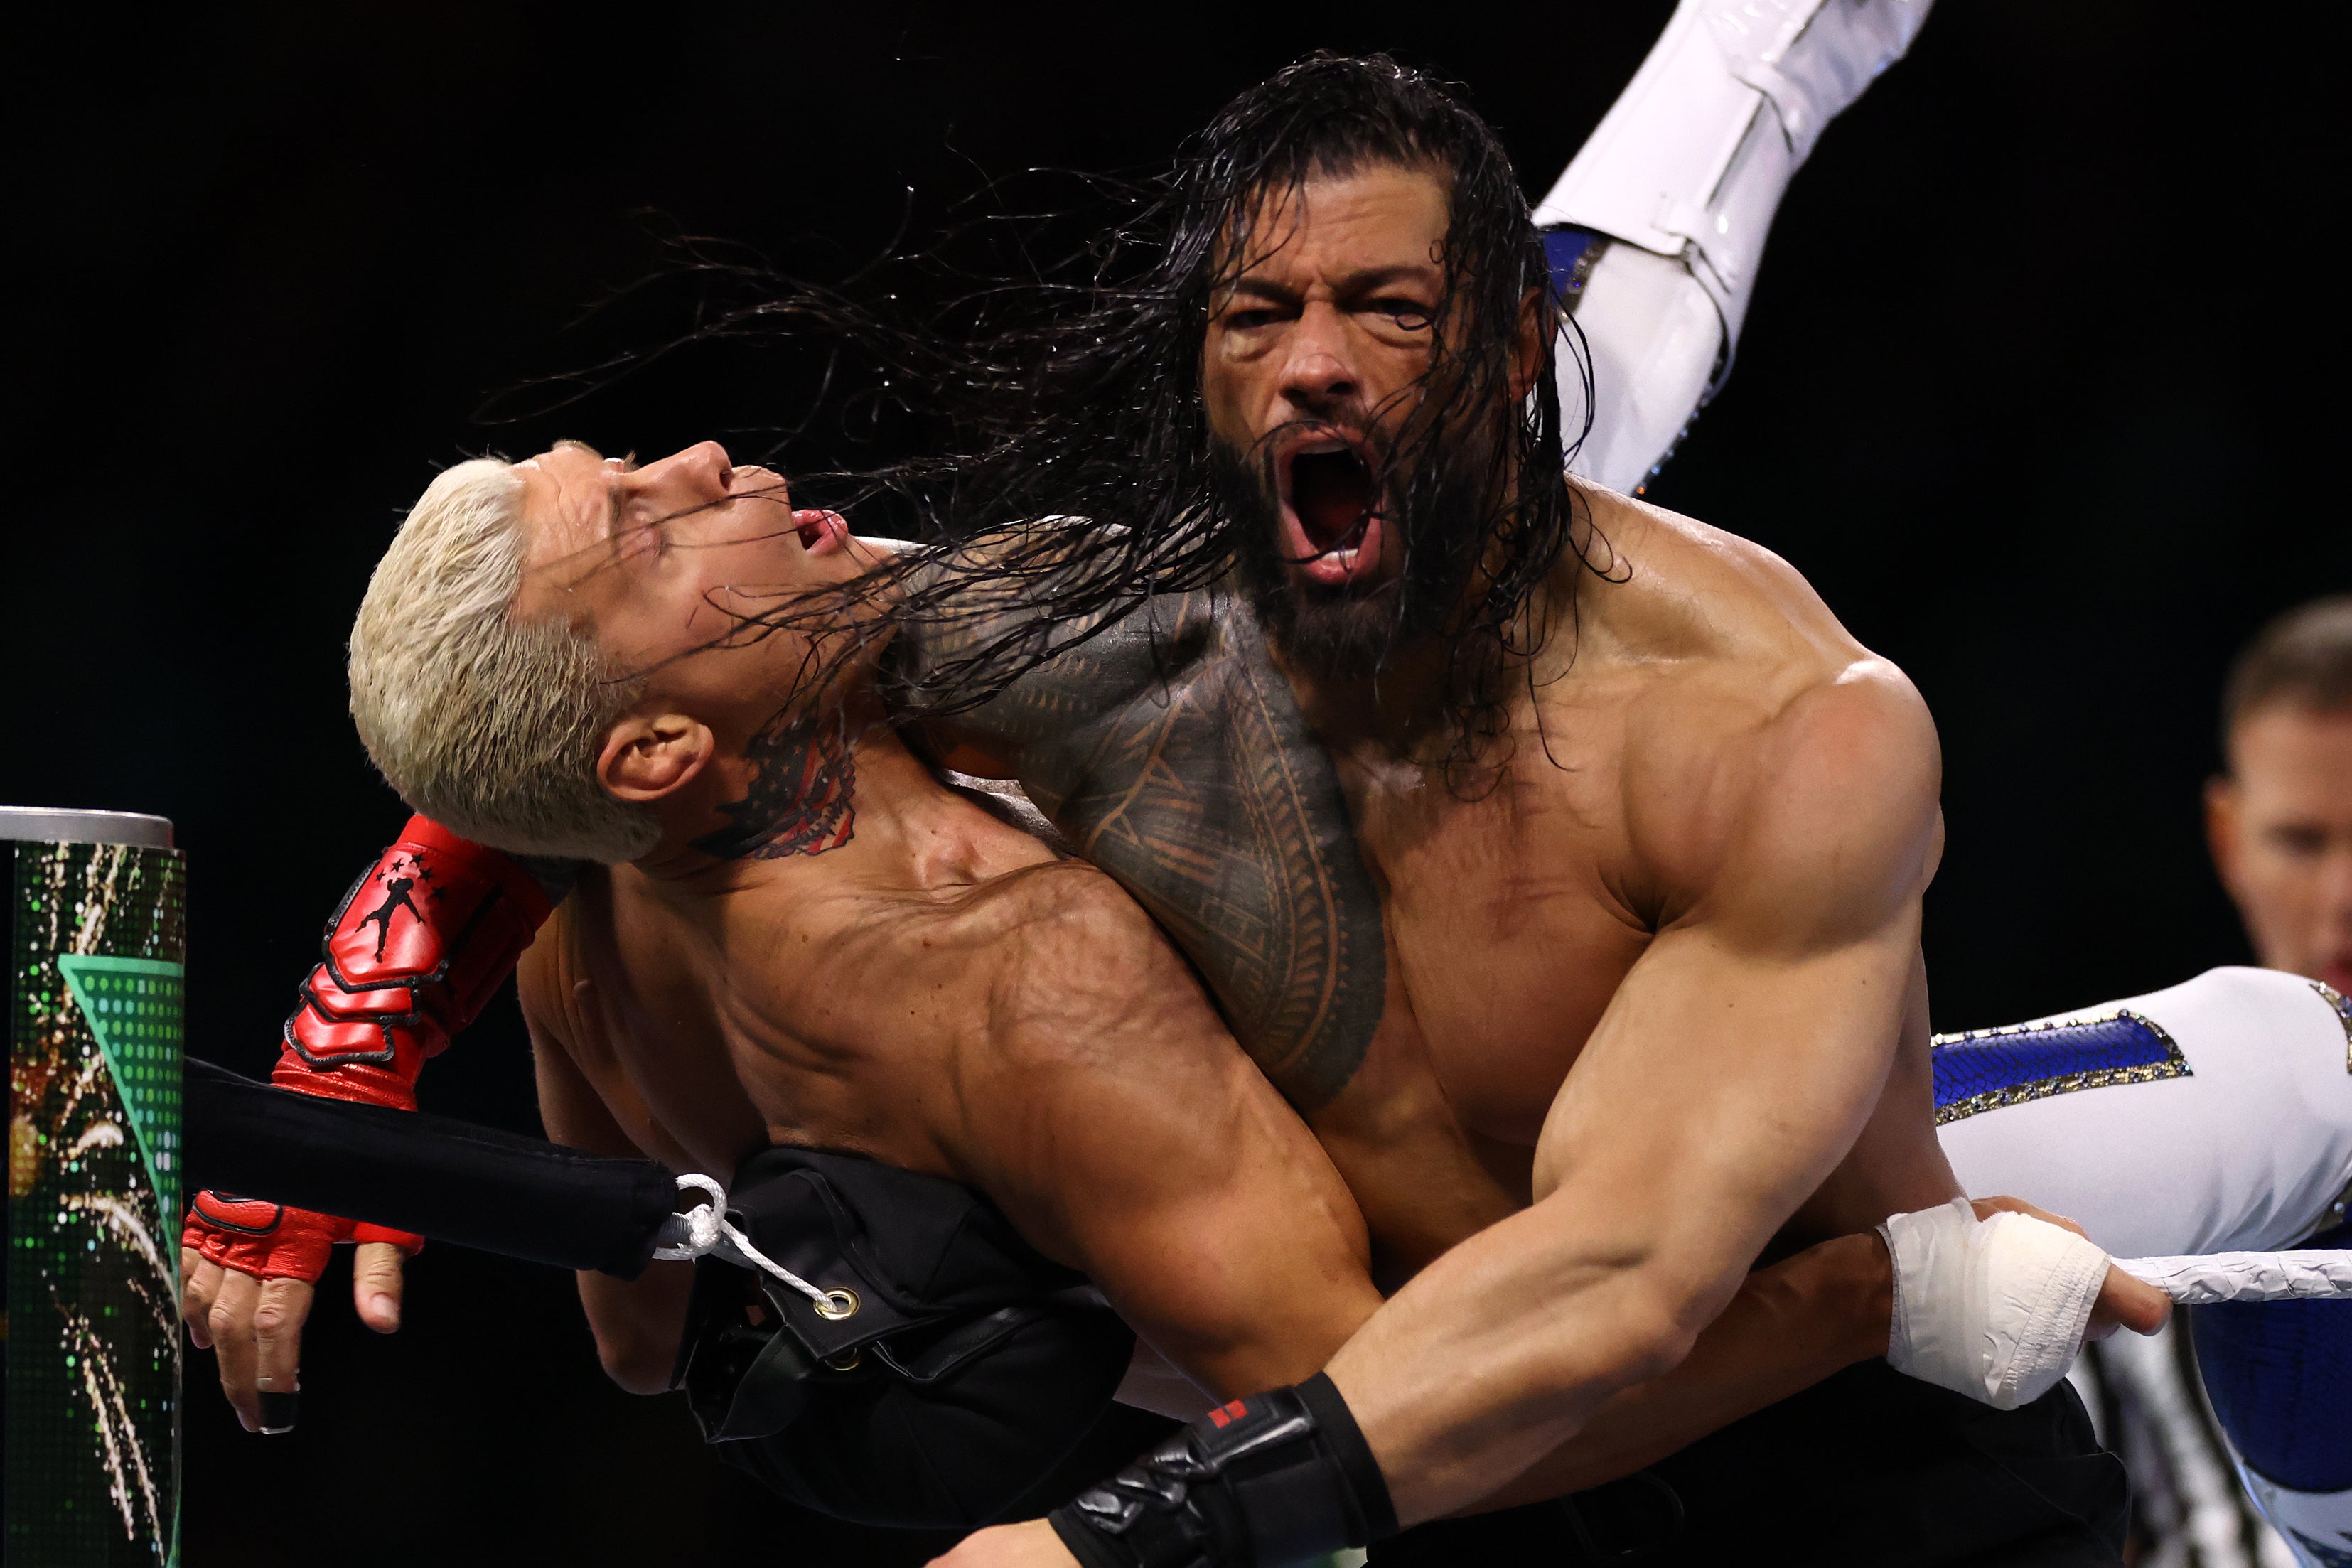 Roman Reigns (right) in action against Cody Rhodes on Saturday